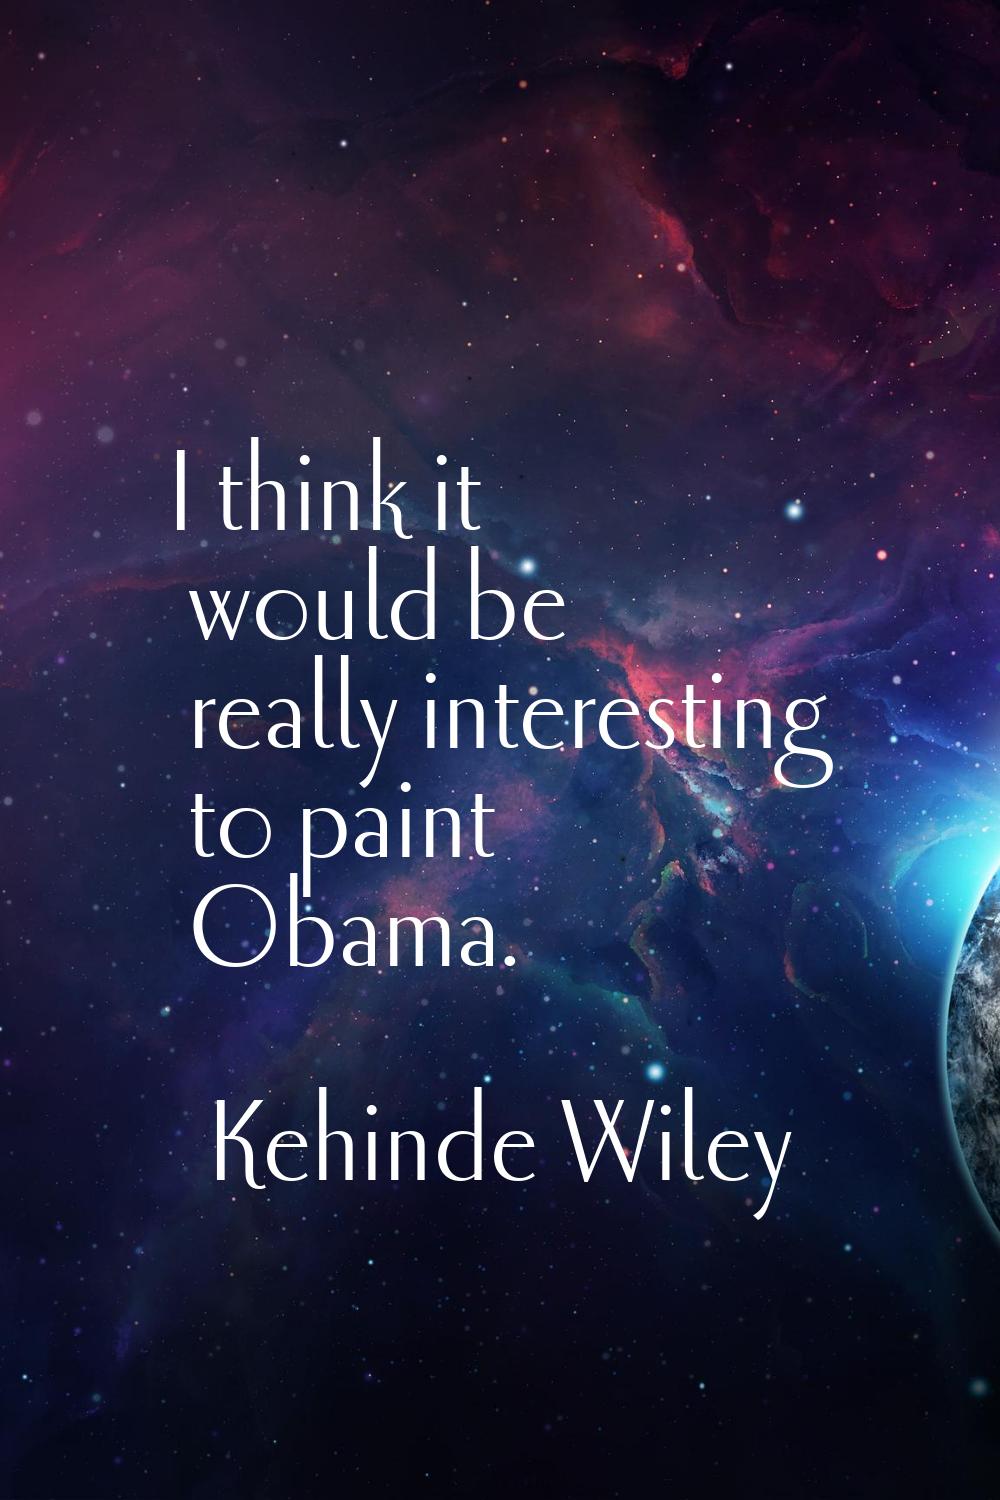 I think it would be really interesting to paint Obama.